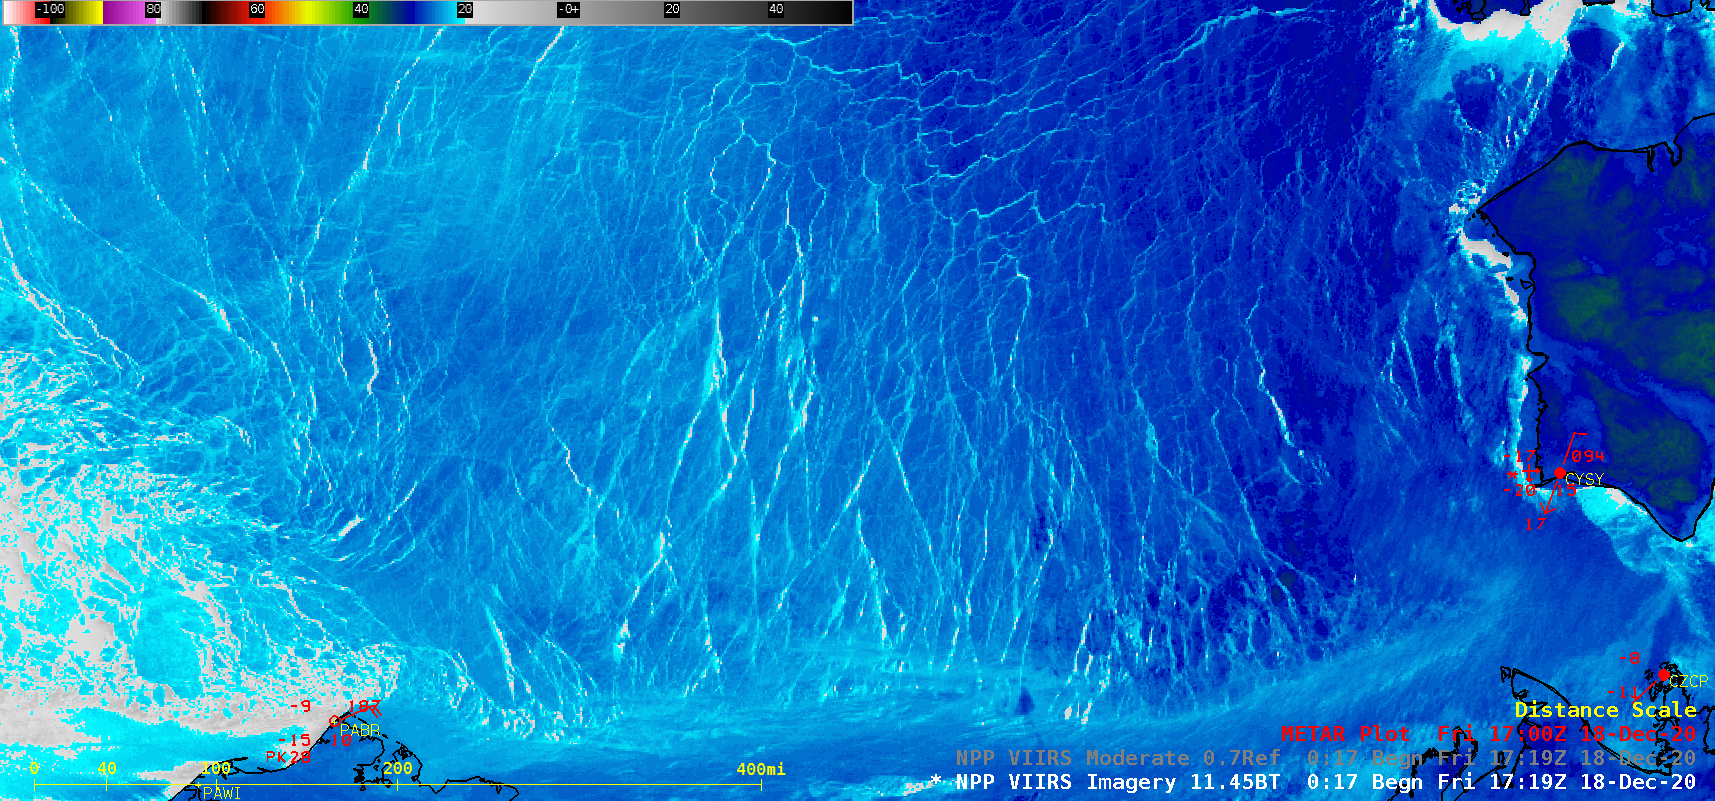 Suomi NPP VIIRS Infrared Window (11.45 µm) images [click to play animation]